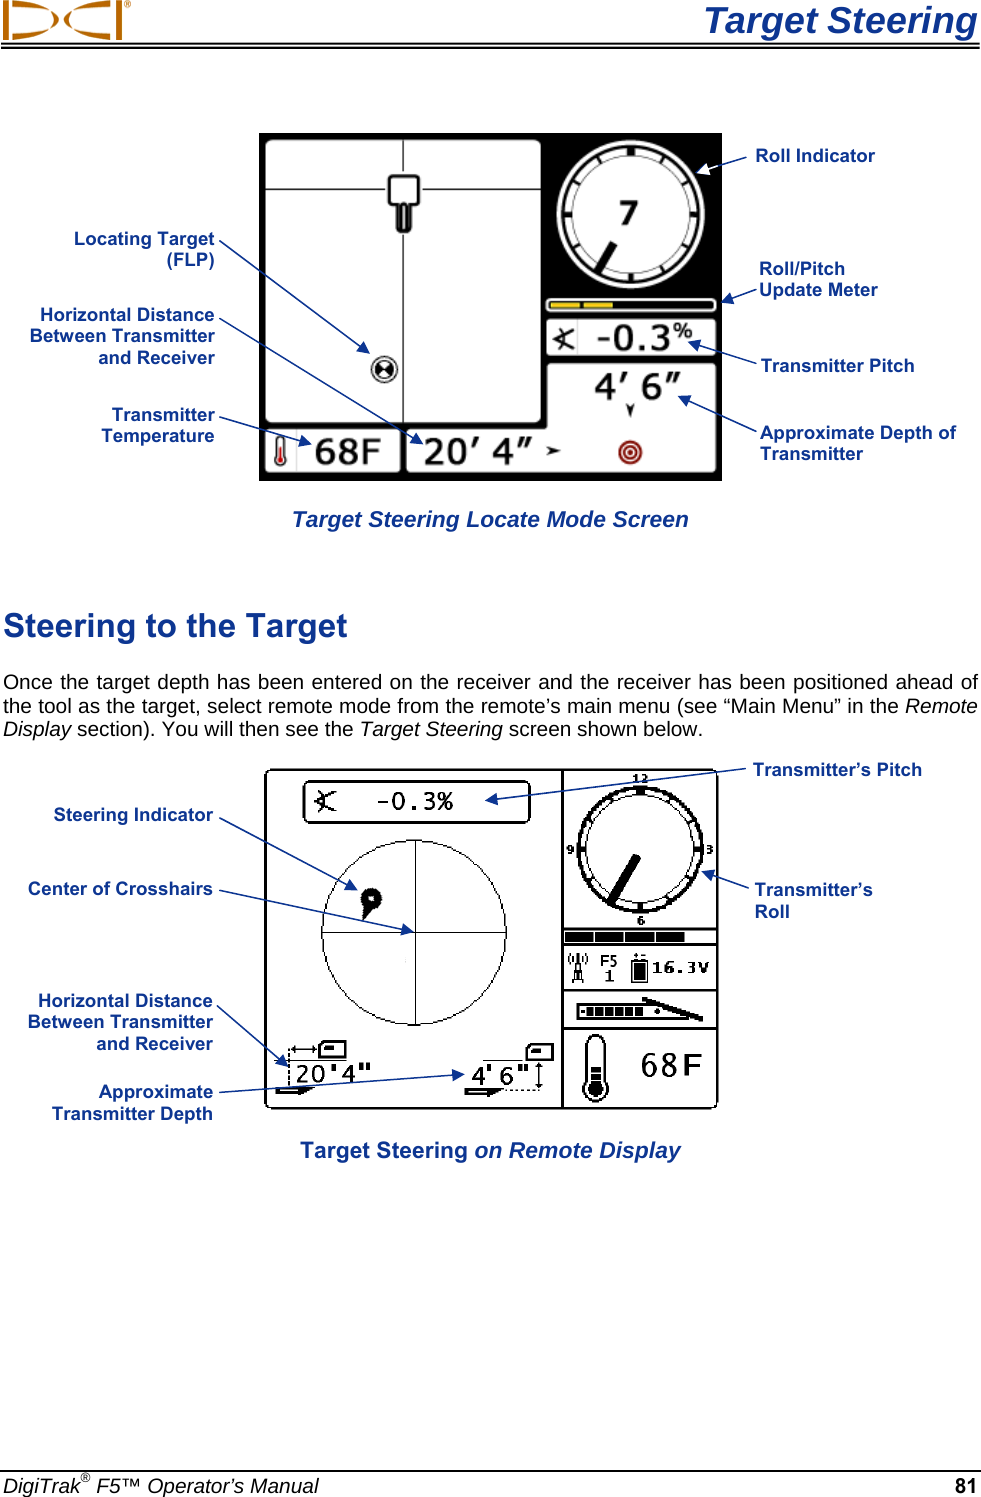  Target Steering DigiTrak® F5™ Operator’s Manual 81  Target Steering Locate Mode Screen  Steering to the Target Once the target depth has been entered on the receiver and the receiver has been positioned ahead of the tool as the target, select remote mode from the remote’s main menu (see “Main Menu” in the Remote Display section). You will then see the Target Steering screen shown below.   Target Steering on Remote Display Horizontal Distance Between Transmitter and Receiver  Approximate Transmitter Depth  Transmitter’s Roll  Transmitter’s Pitch Horizontal Distance Between Transmitter and Receiver  Transmitter Temperature   Approximate Depth of Transmitter  Transmitter Pitch Locating Target (FLP)  Roll/Pitch Update Meter Roll Indicator Steering Indicator  Center of Crosshairs 